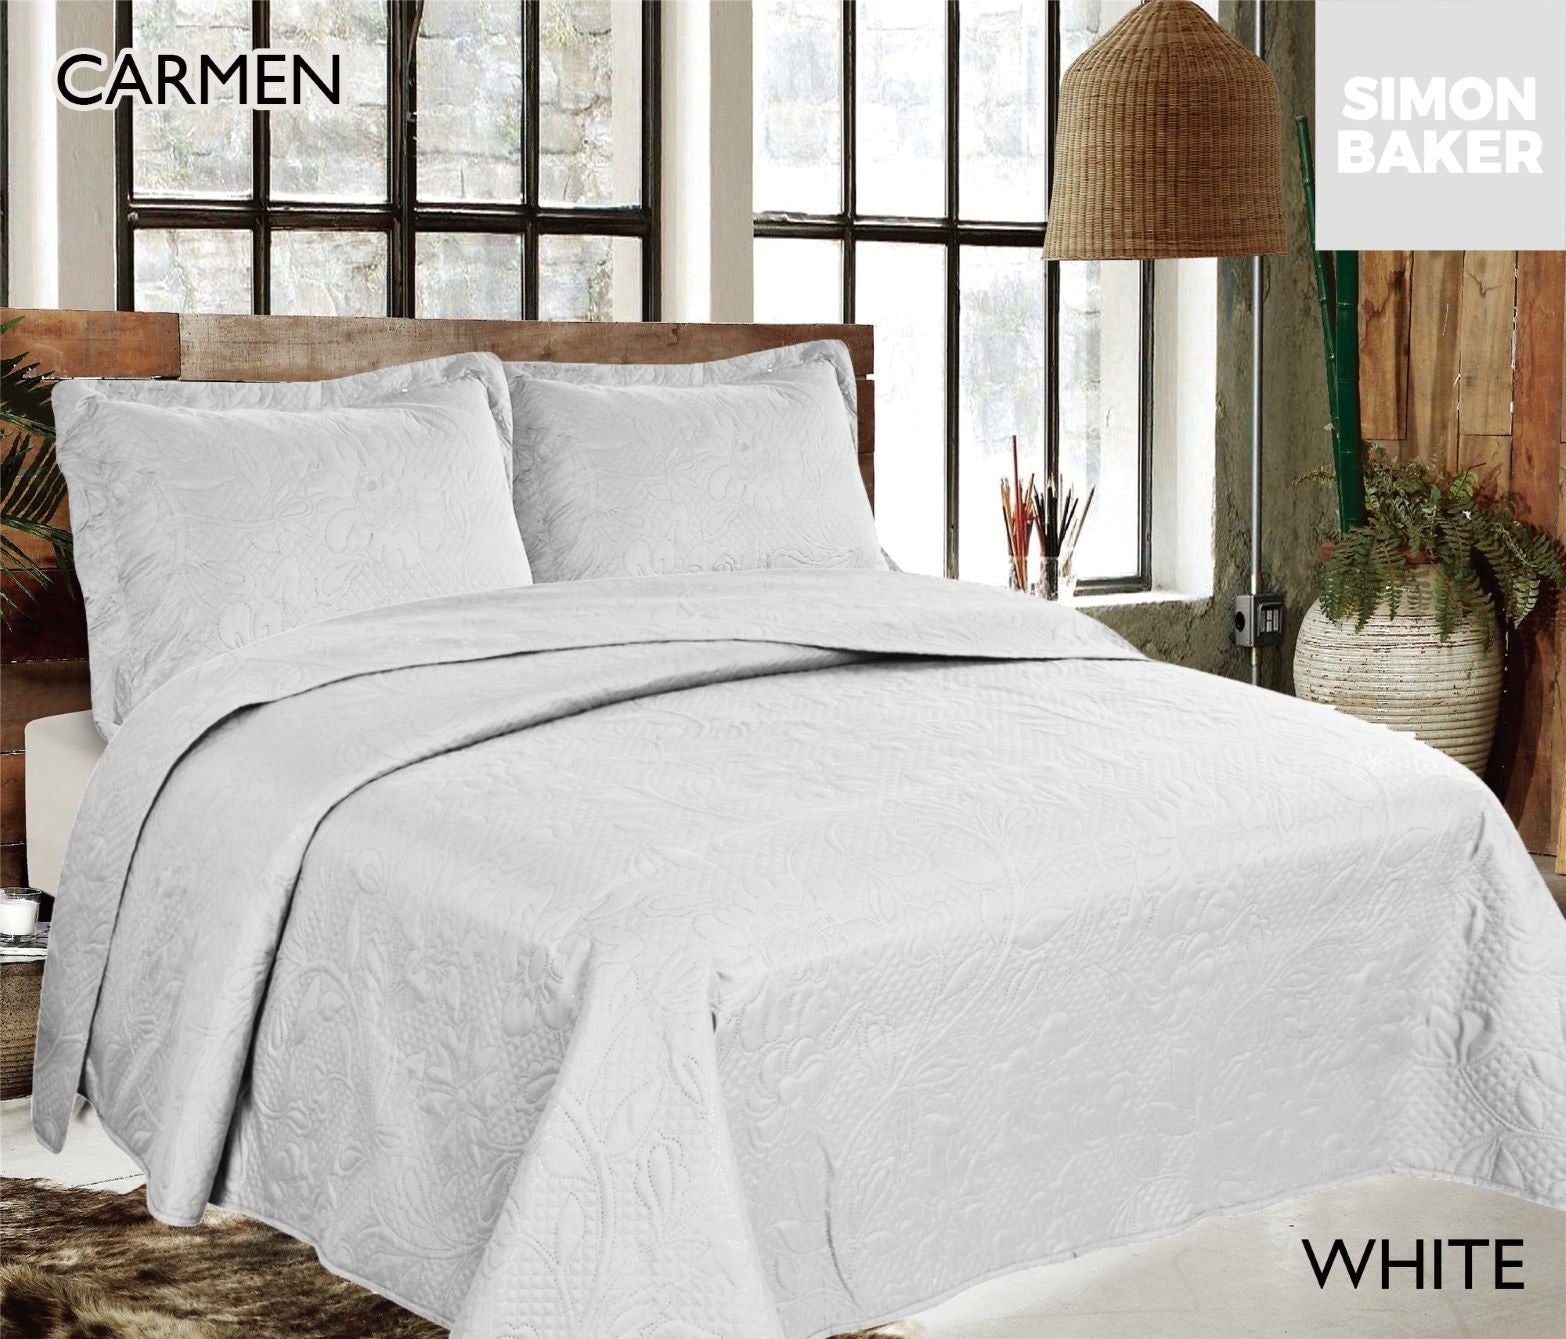 Quilted Carmen Bedspreads